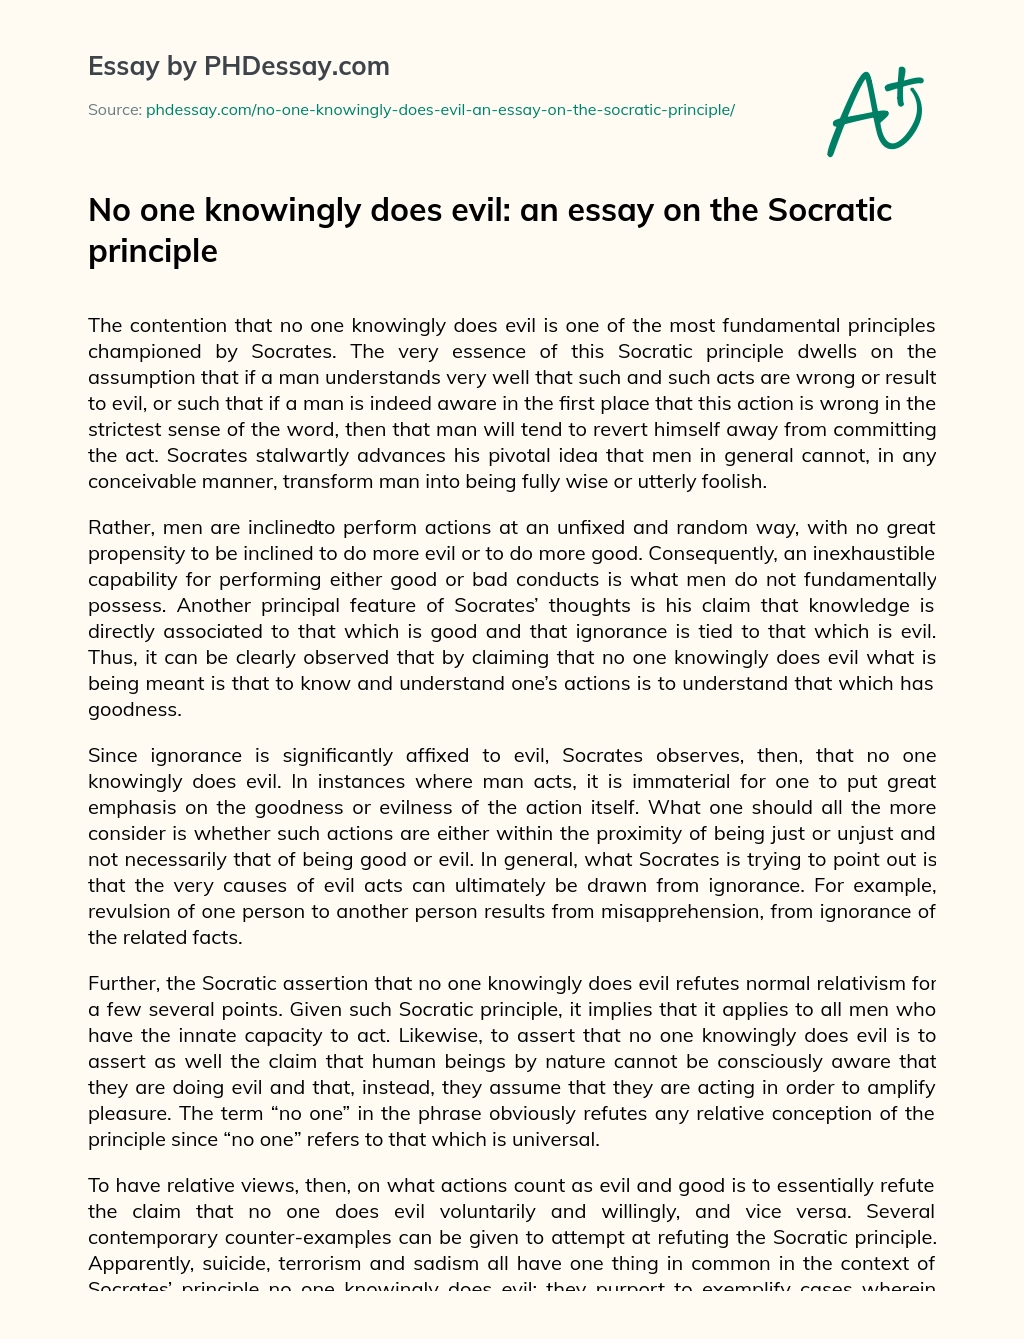 No one knowingly does evil: an essay on the Socratic principle essay